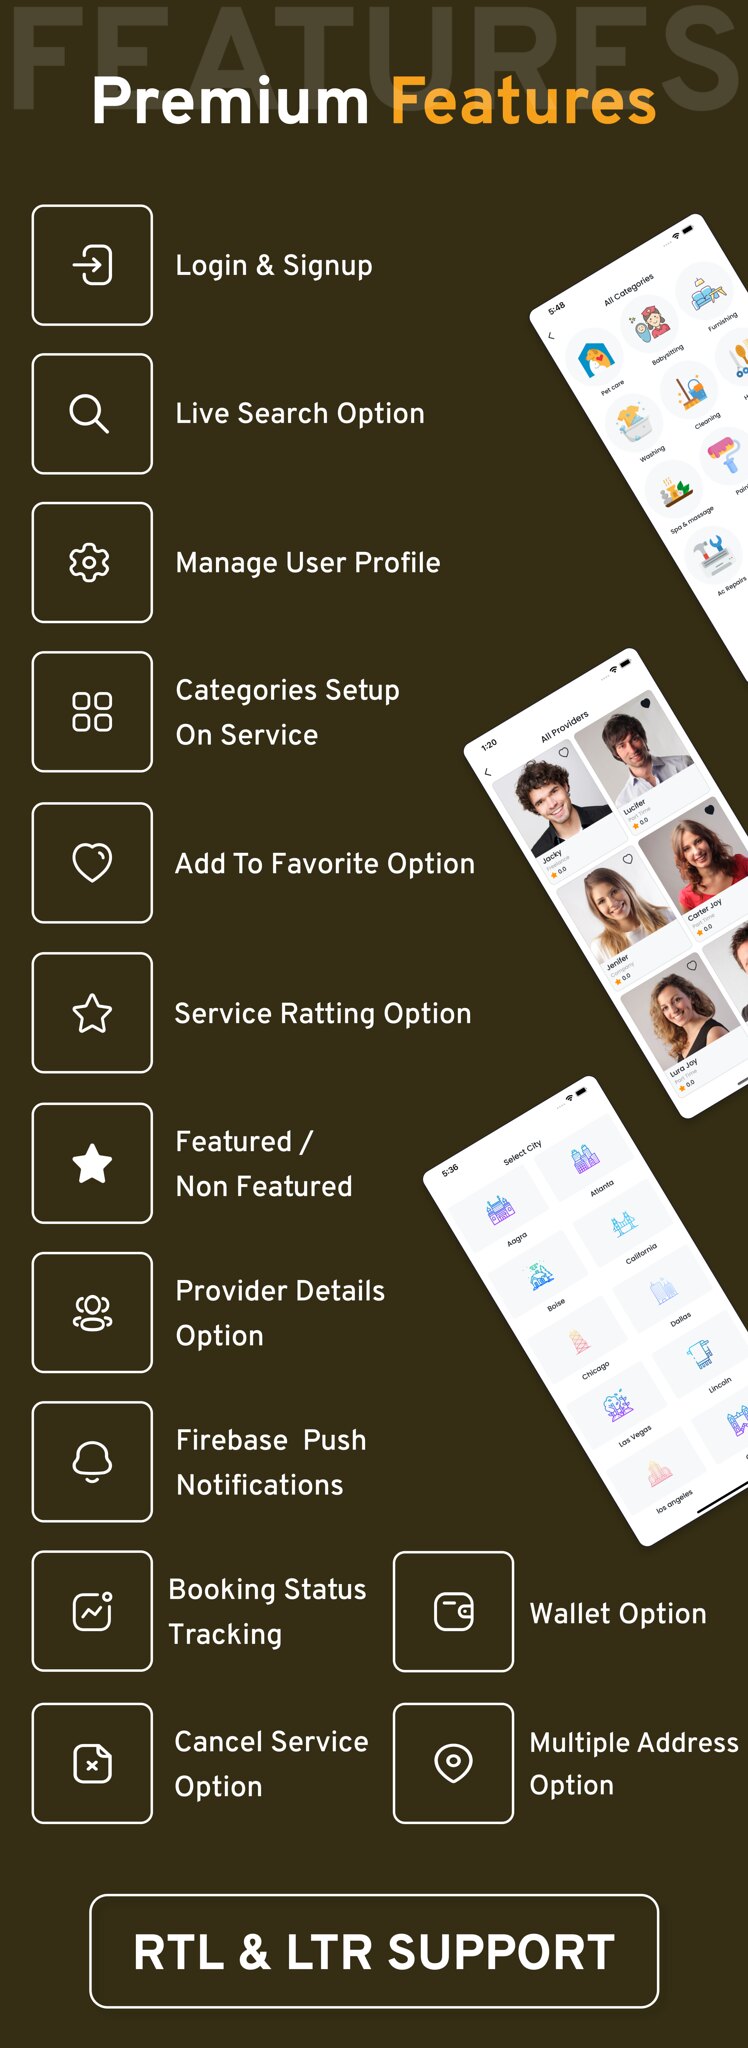 Handy service - On-Demand Home Services, Business Listing, Handyman Booking iOS App with Admin Panel - 18